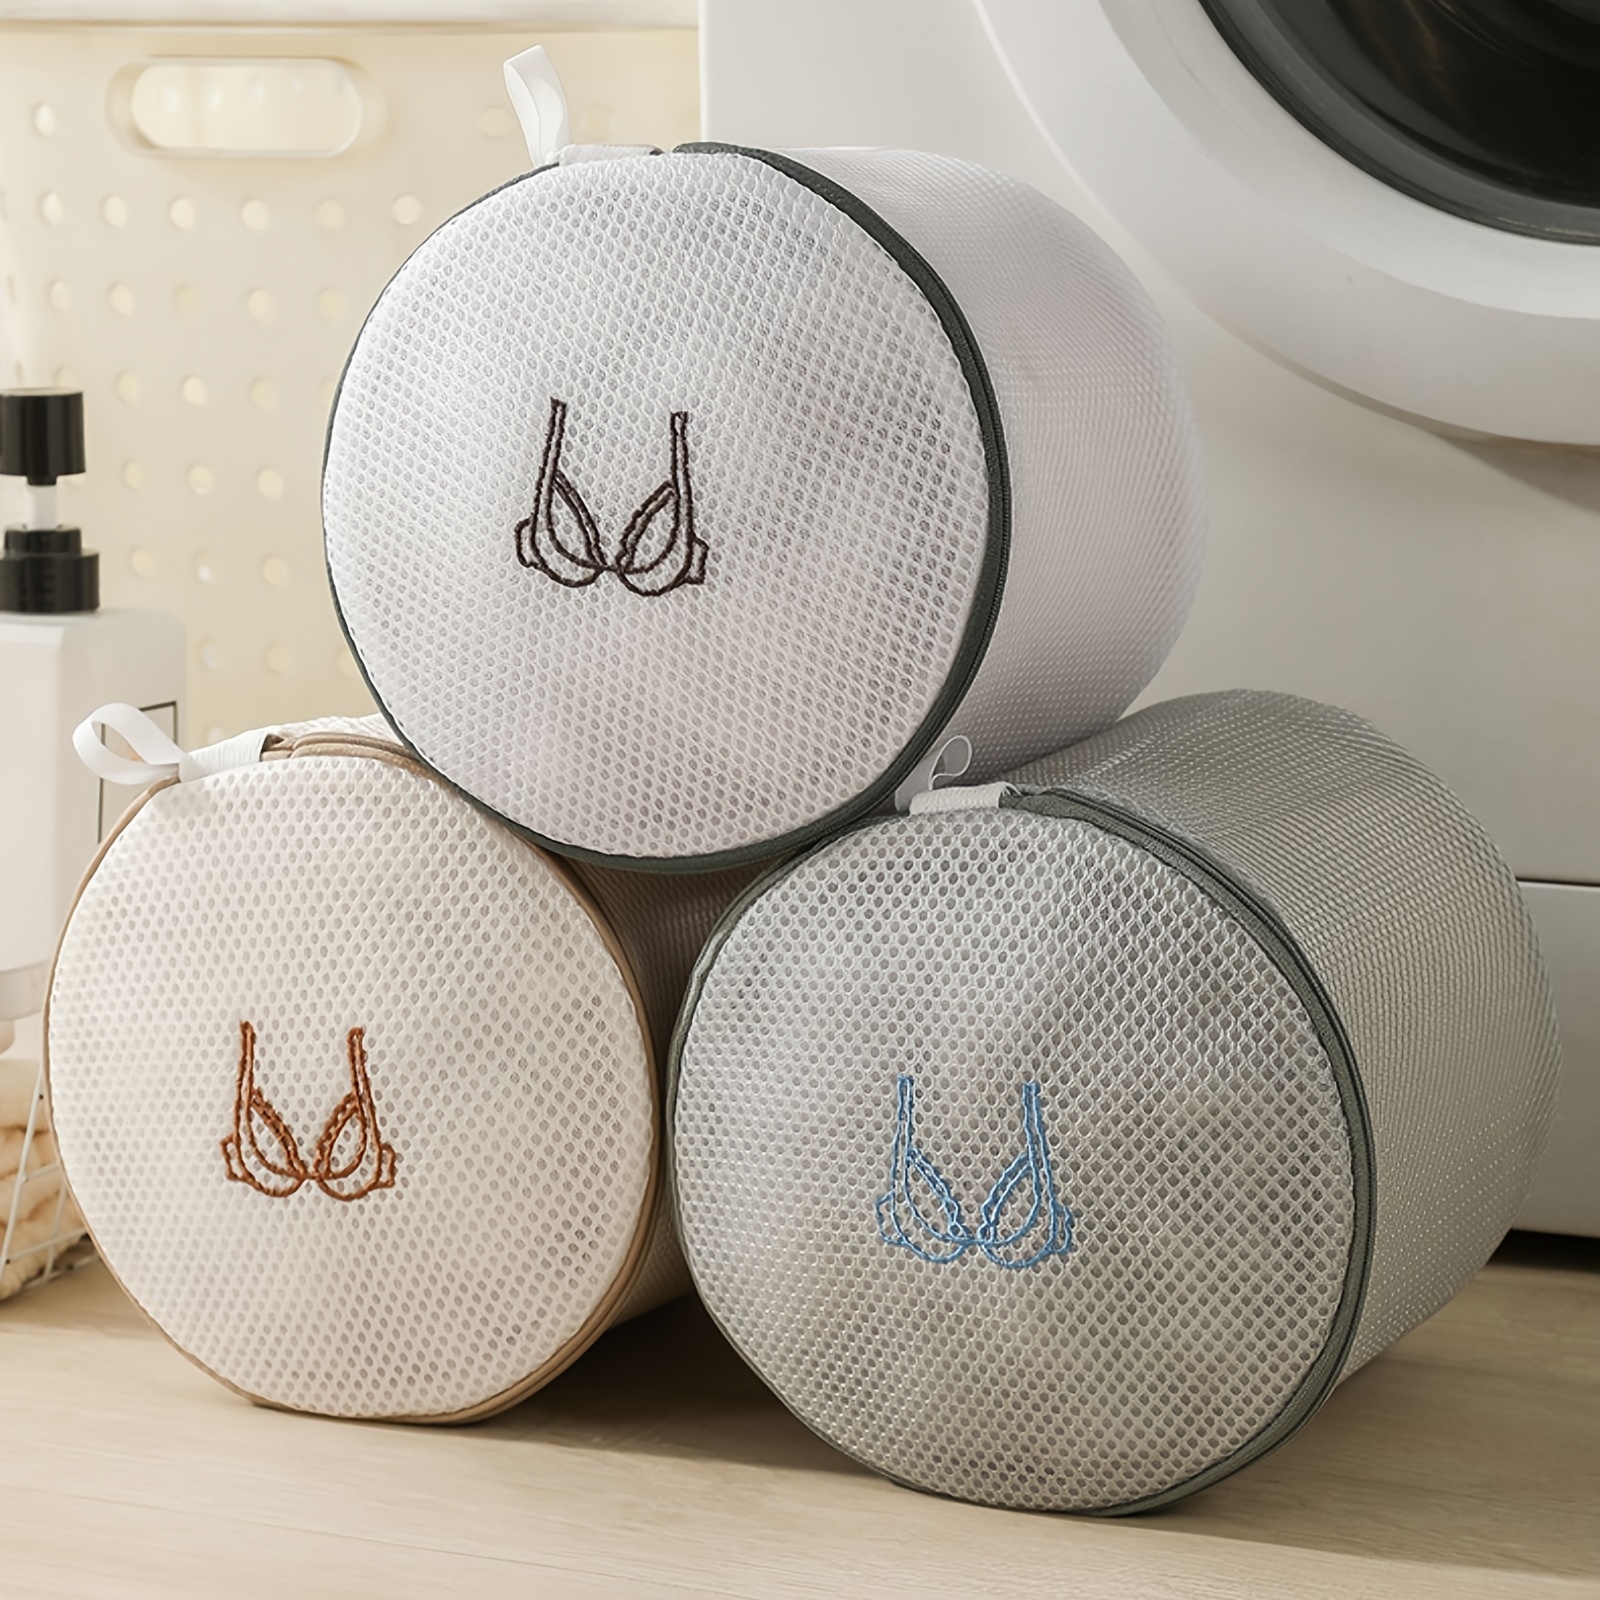 1pc Bra Laundry Bag Washing Machine Specialized Mesh Wash Bags, Thickened  Type, Cord Locked, Bra Washer Protector